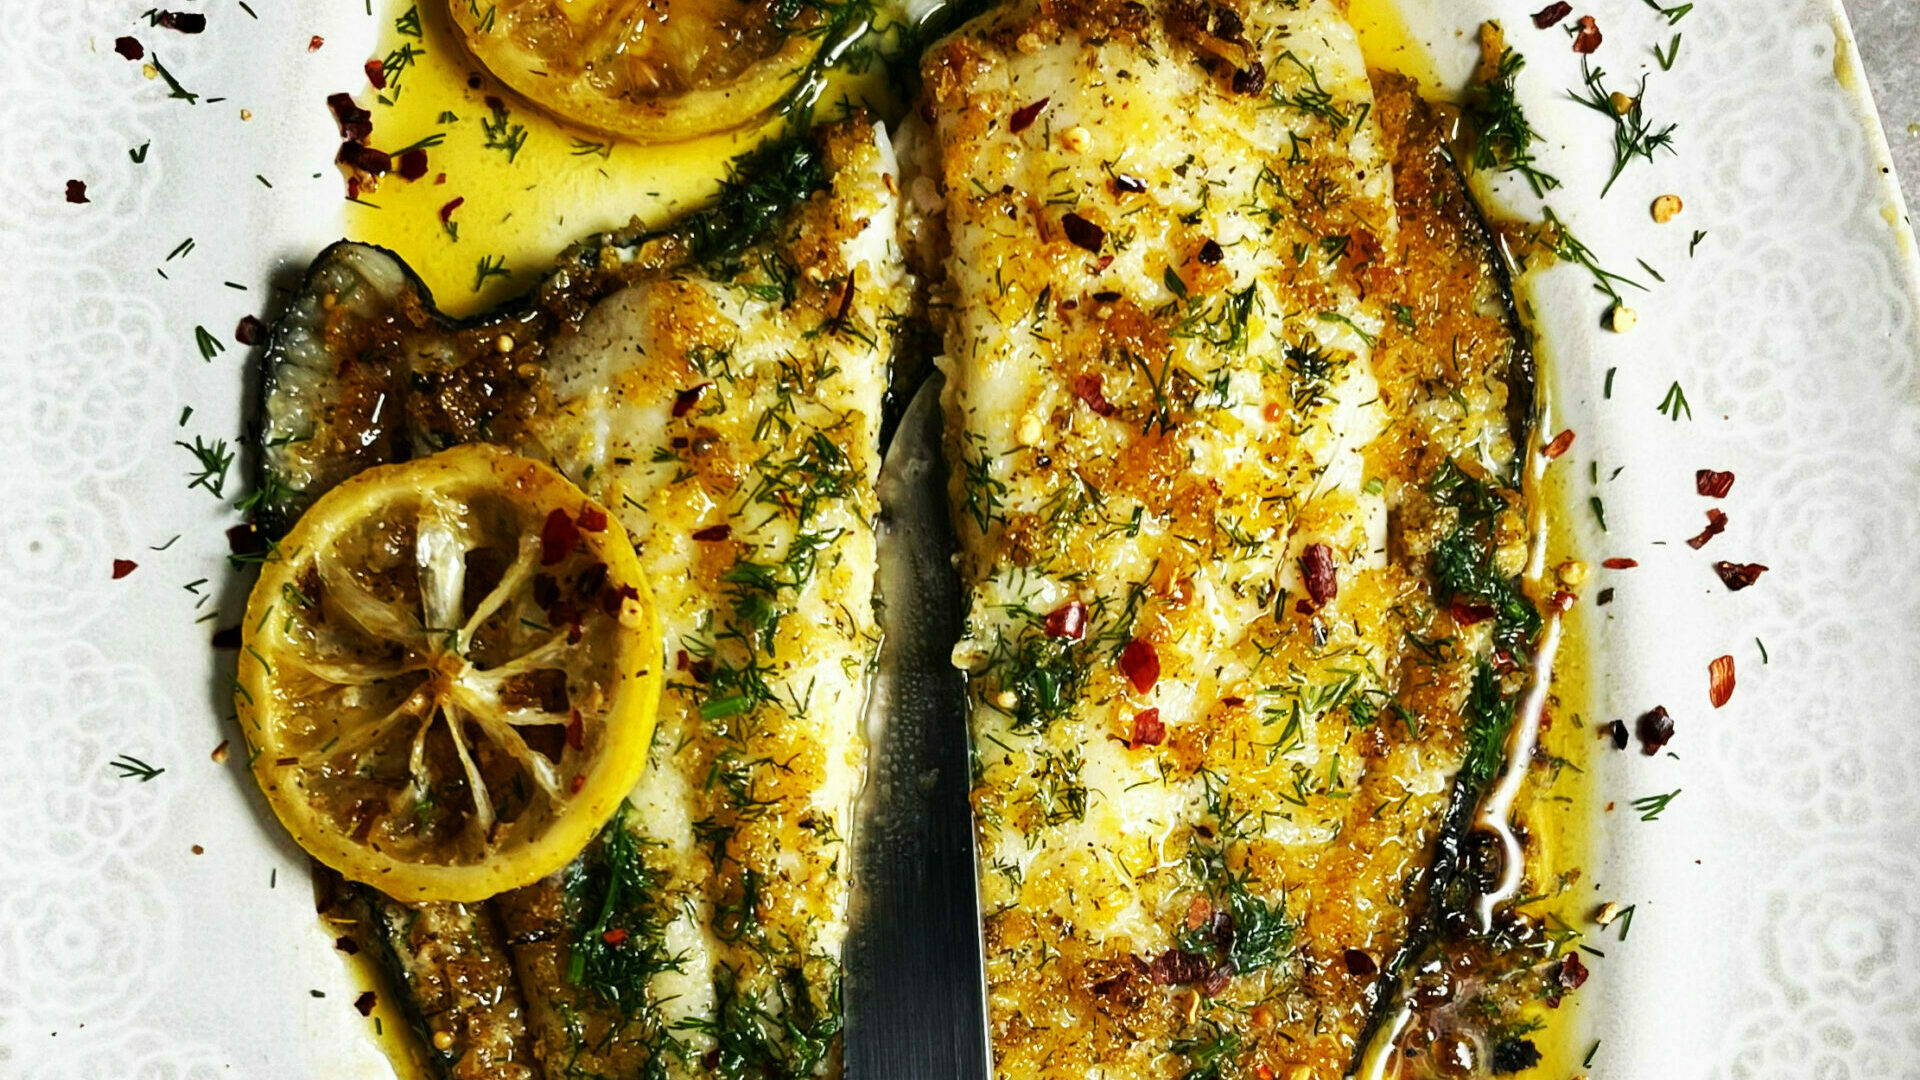 Plaice with Lemon Dill Butter - Discover Seafood